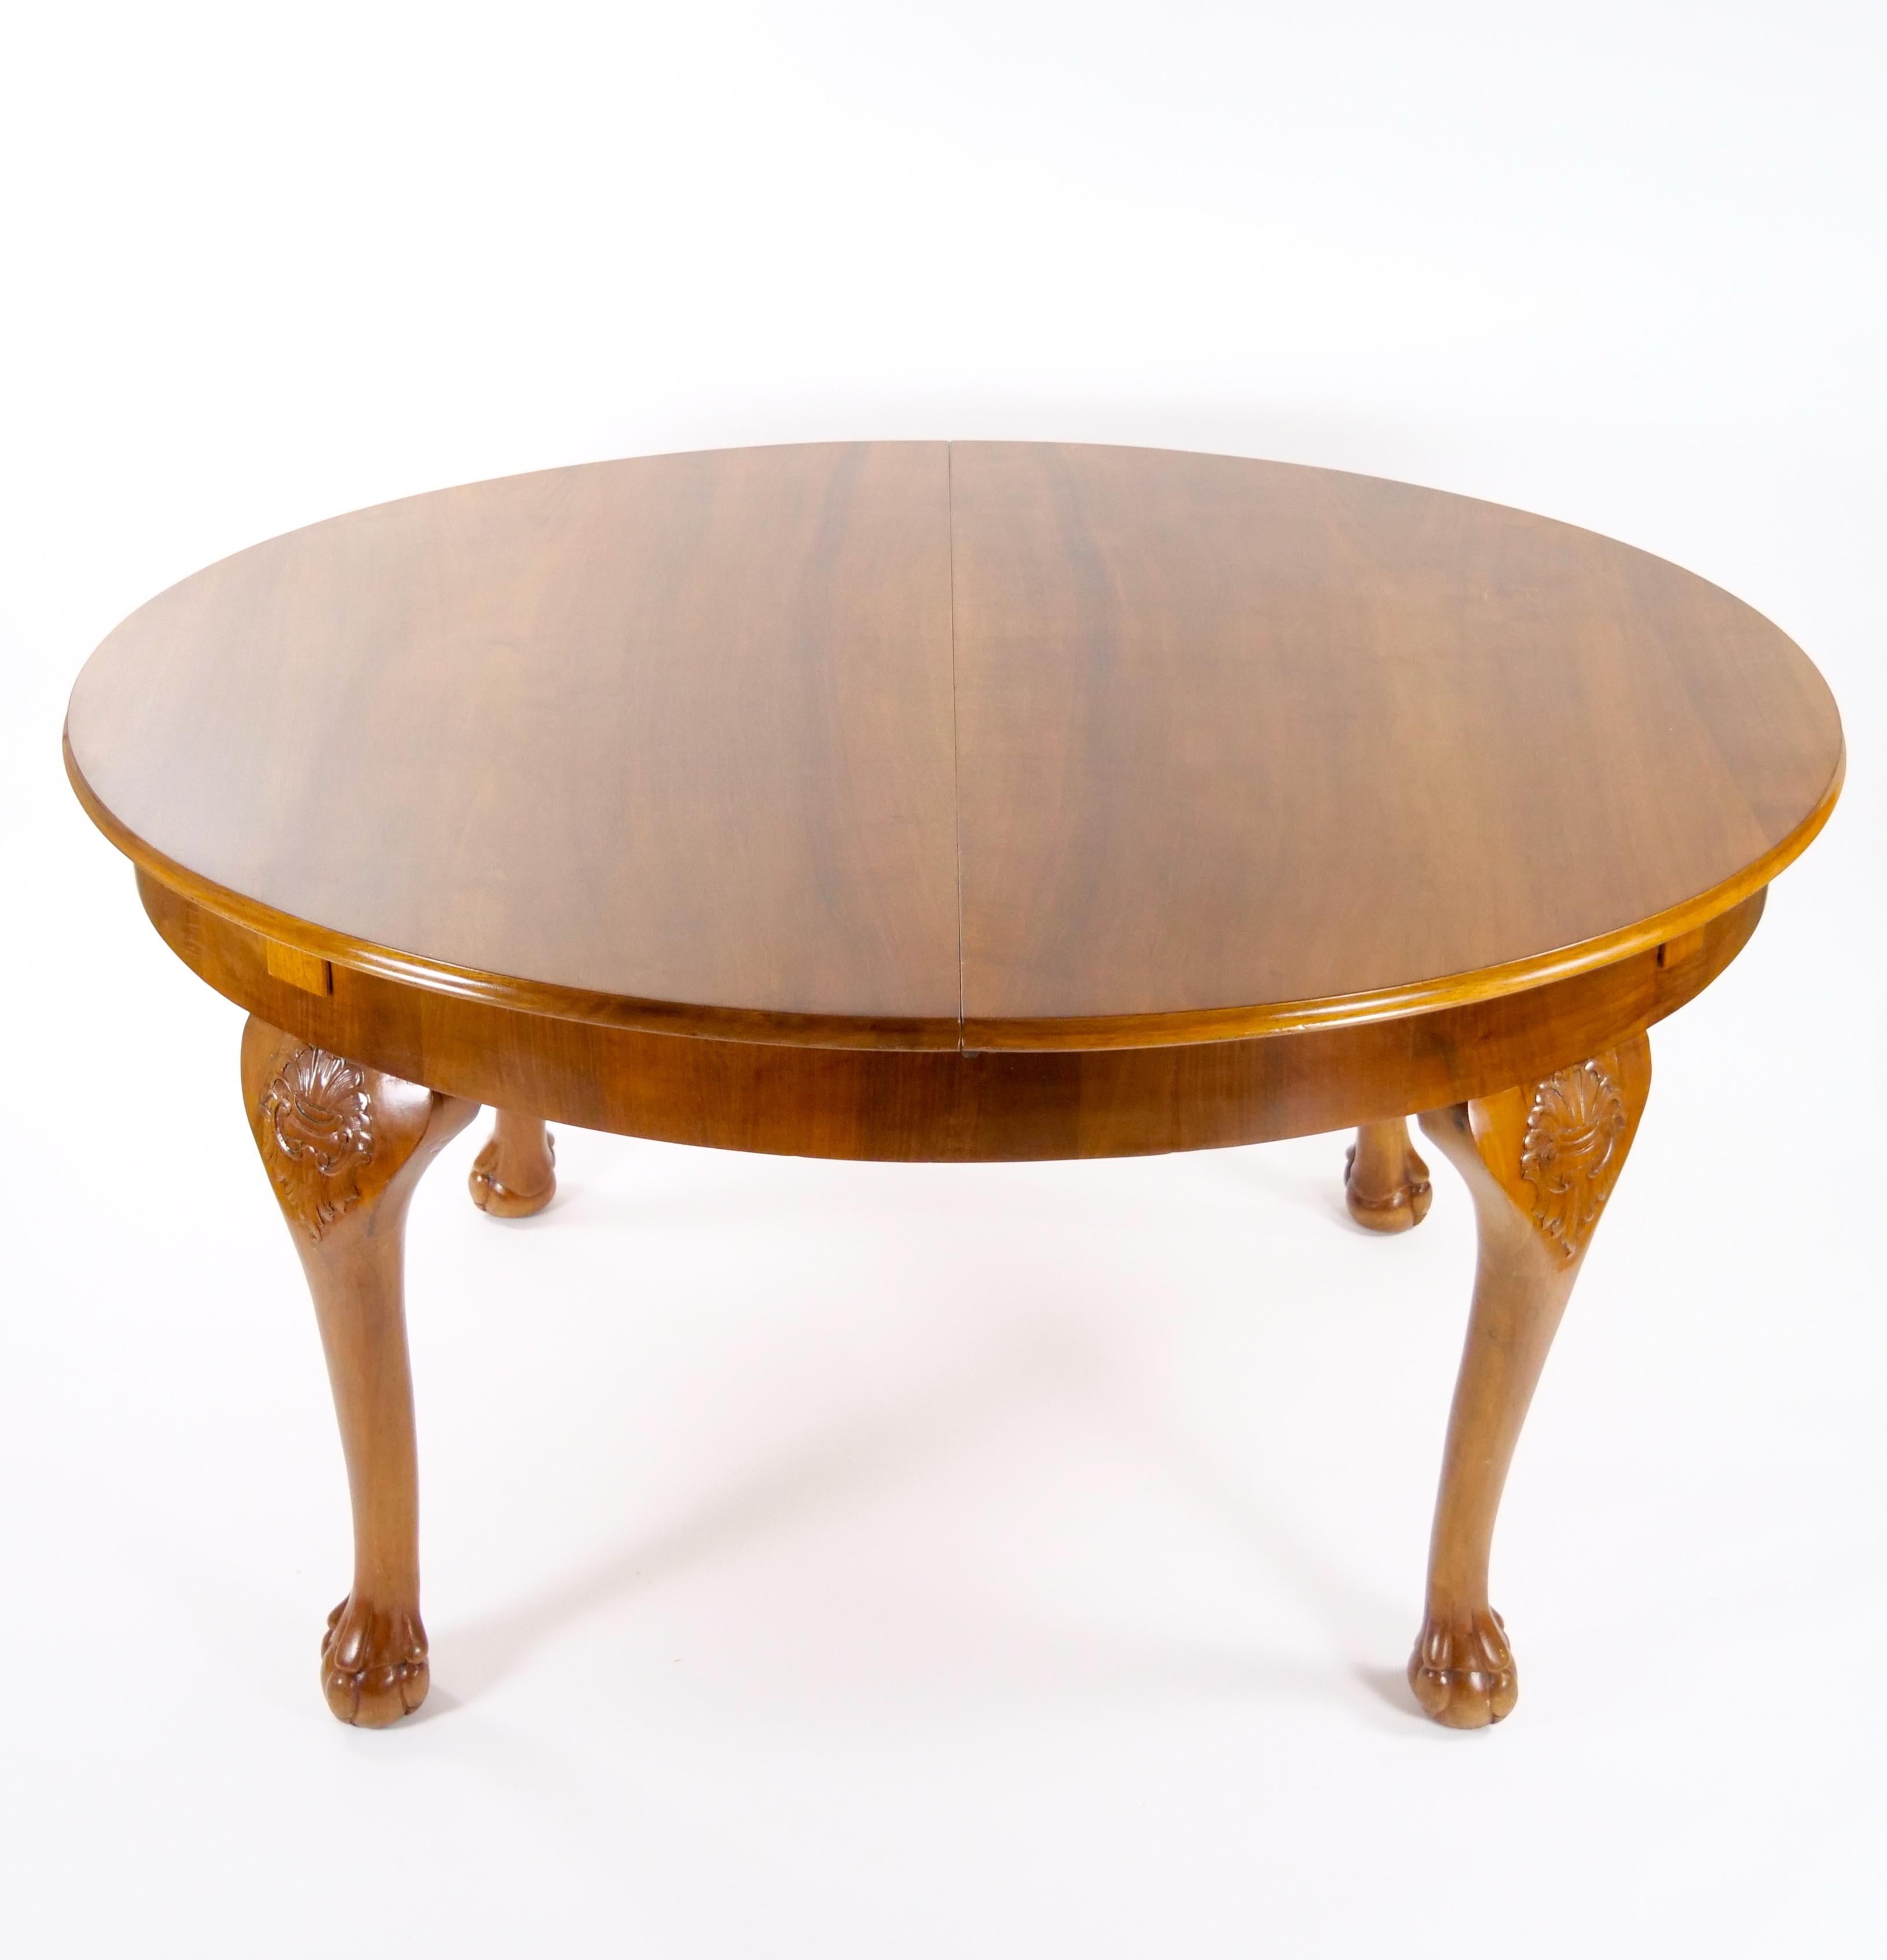 Transform your dining room with this exquisite Early 20th Century Italian Hand-Carved Walnut Neoclassical Style Dining Table. This oval-shaped dining table is a true masterpiece, meticulously crafted from rich walnut wood and adorned with intricate